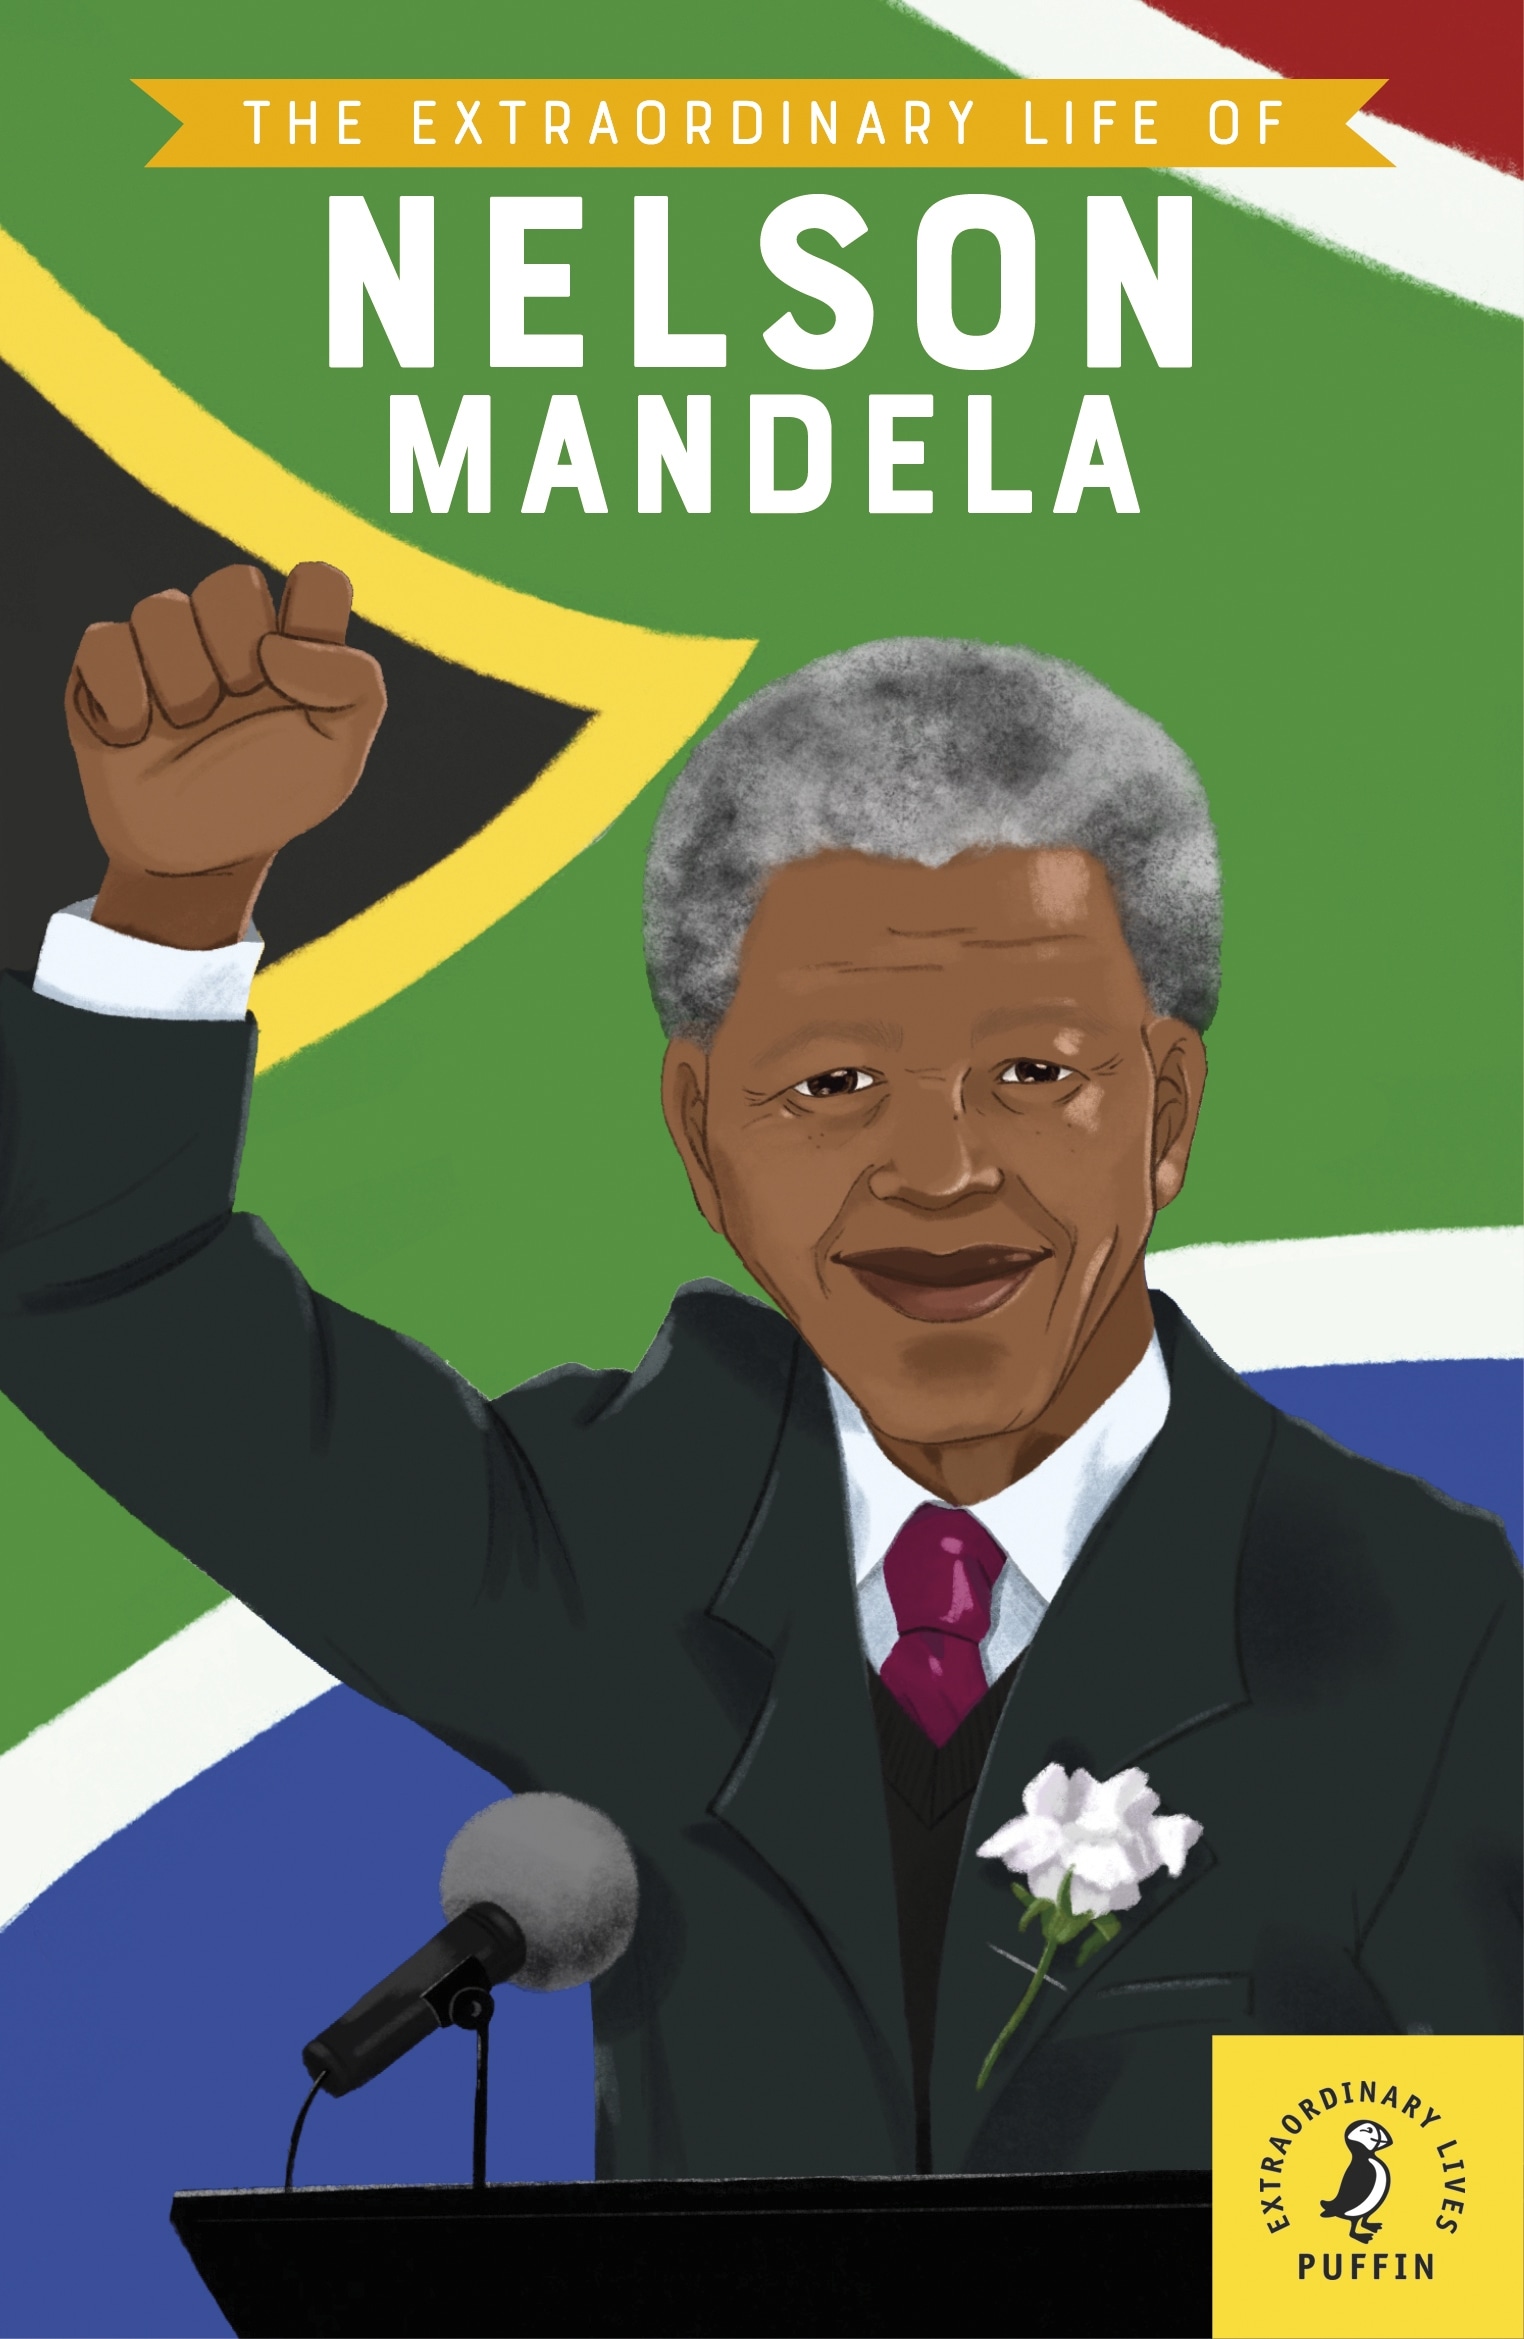 Book “The Extraordinary Life of Nelson Mandela” by E. L. Norry — October 8, 2020